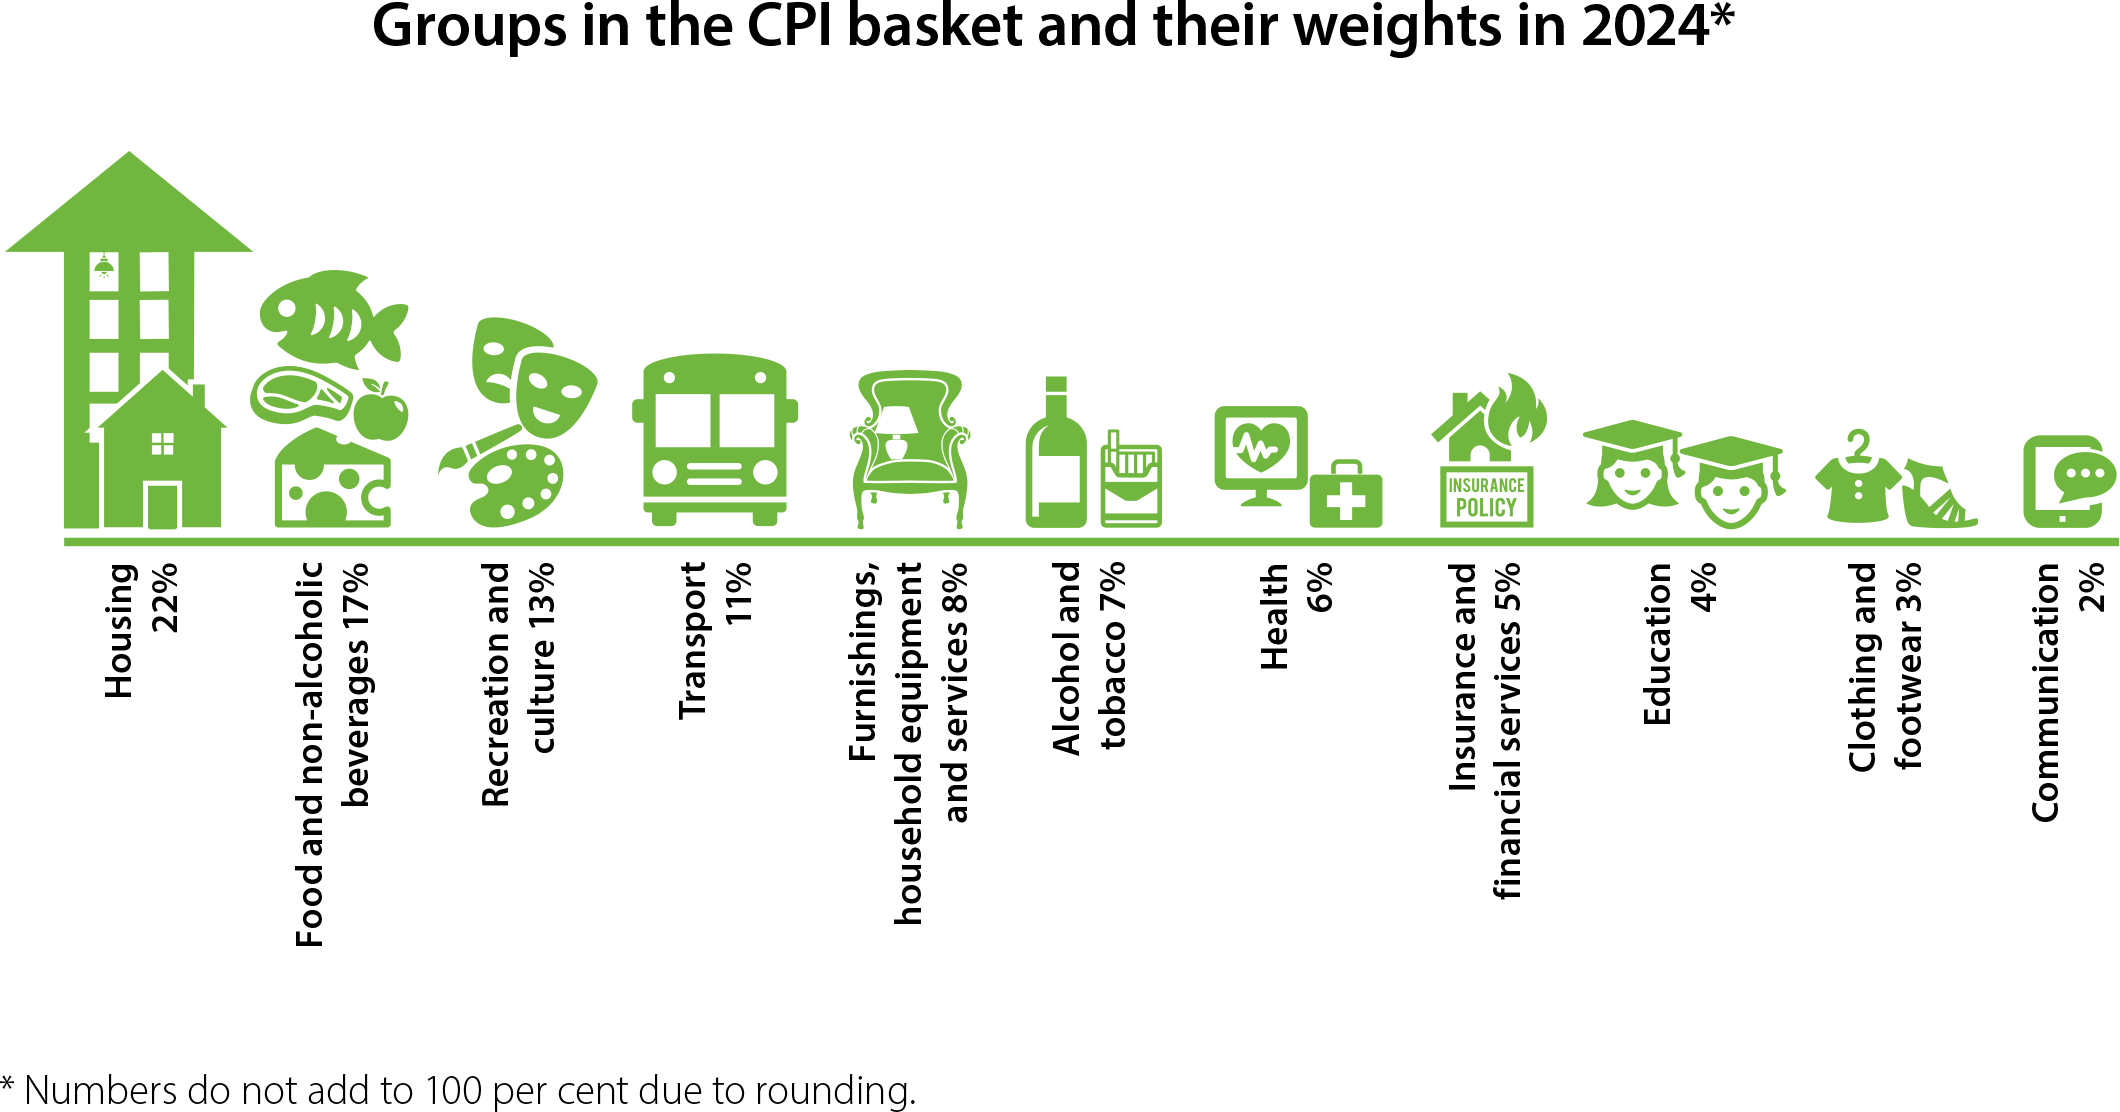 Groups in the CPI basket and their weights